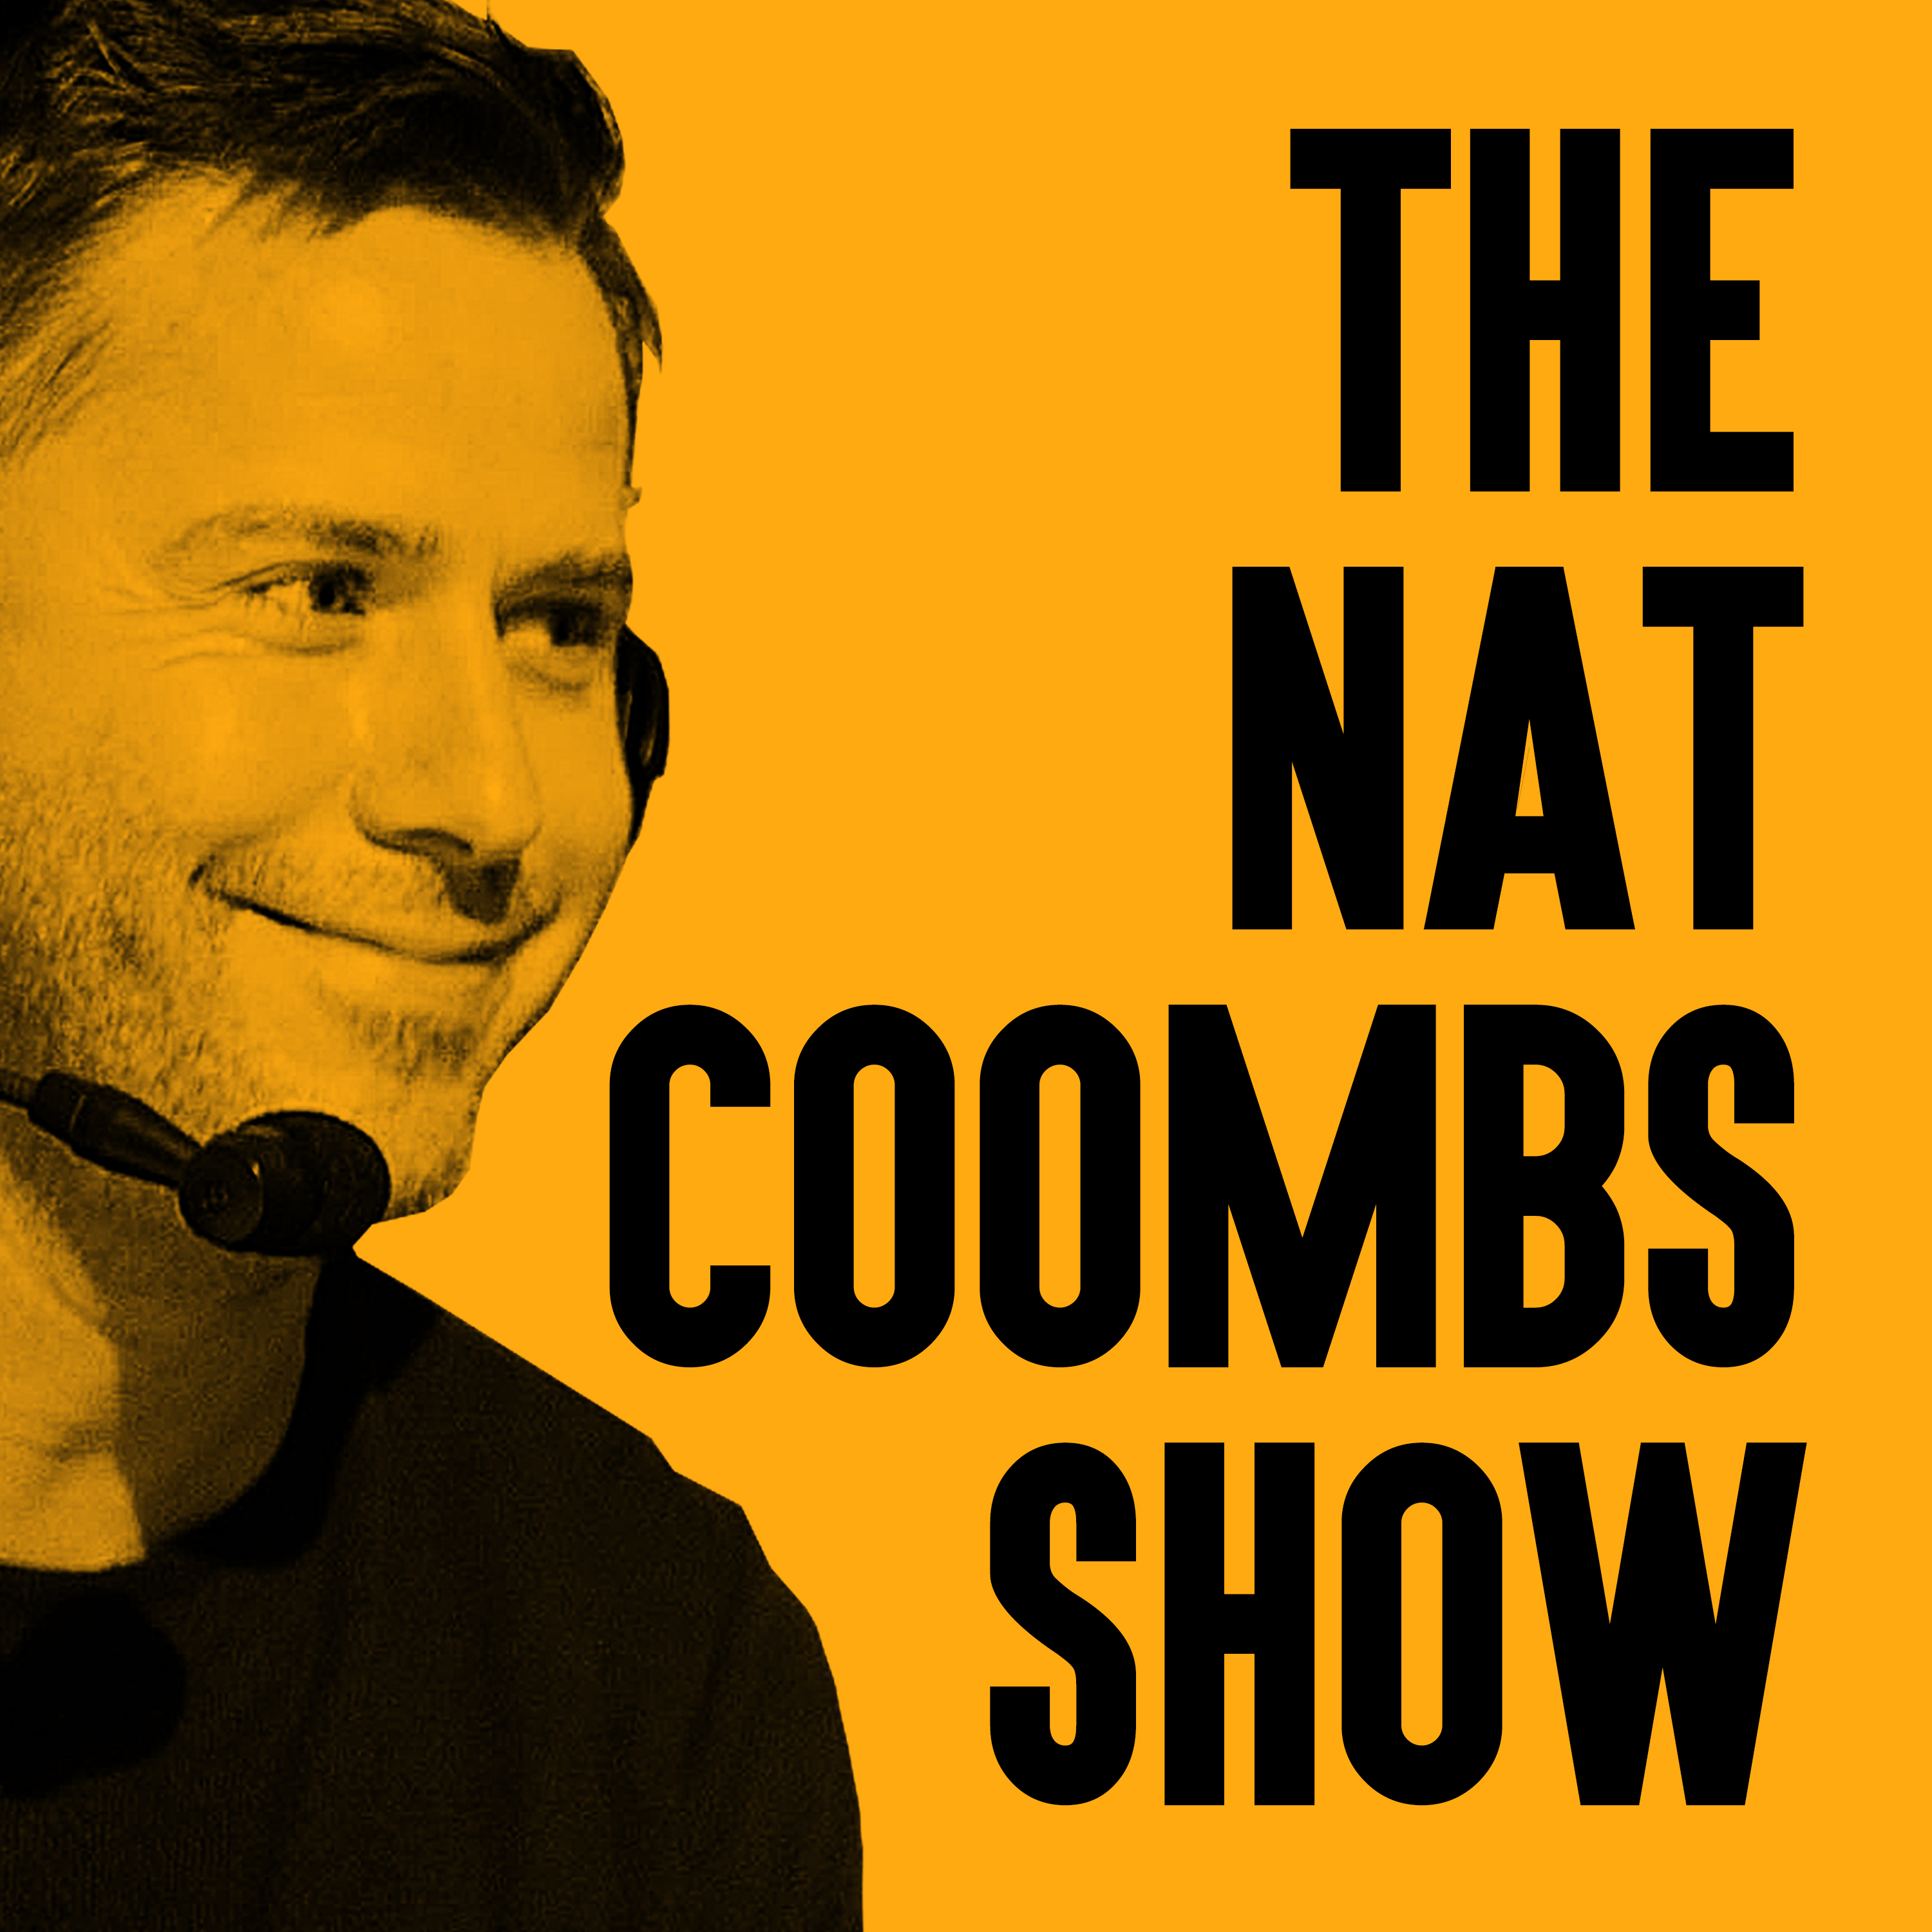 The Nat Coombs Show image